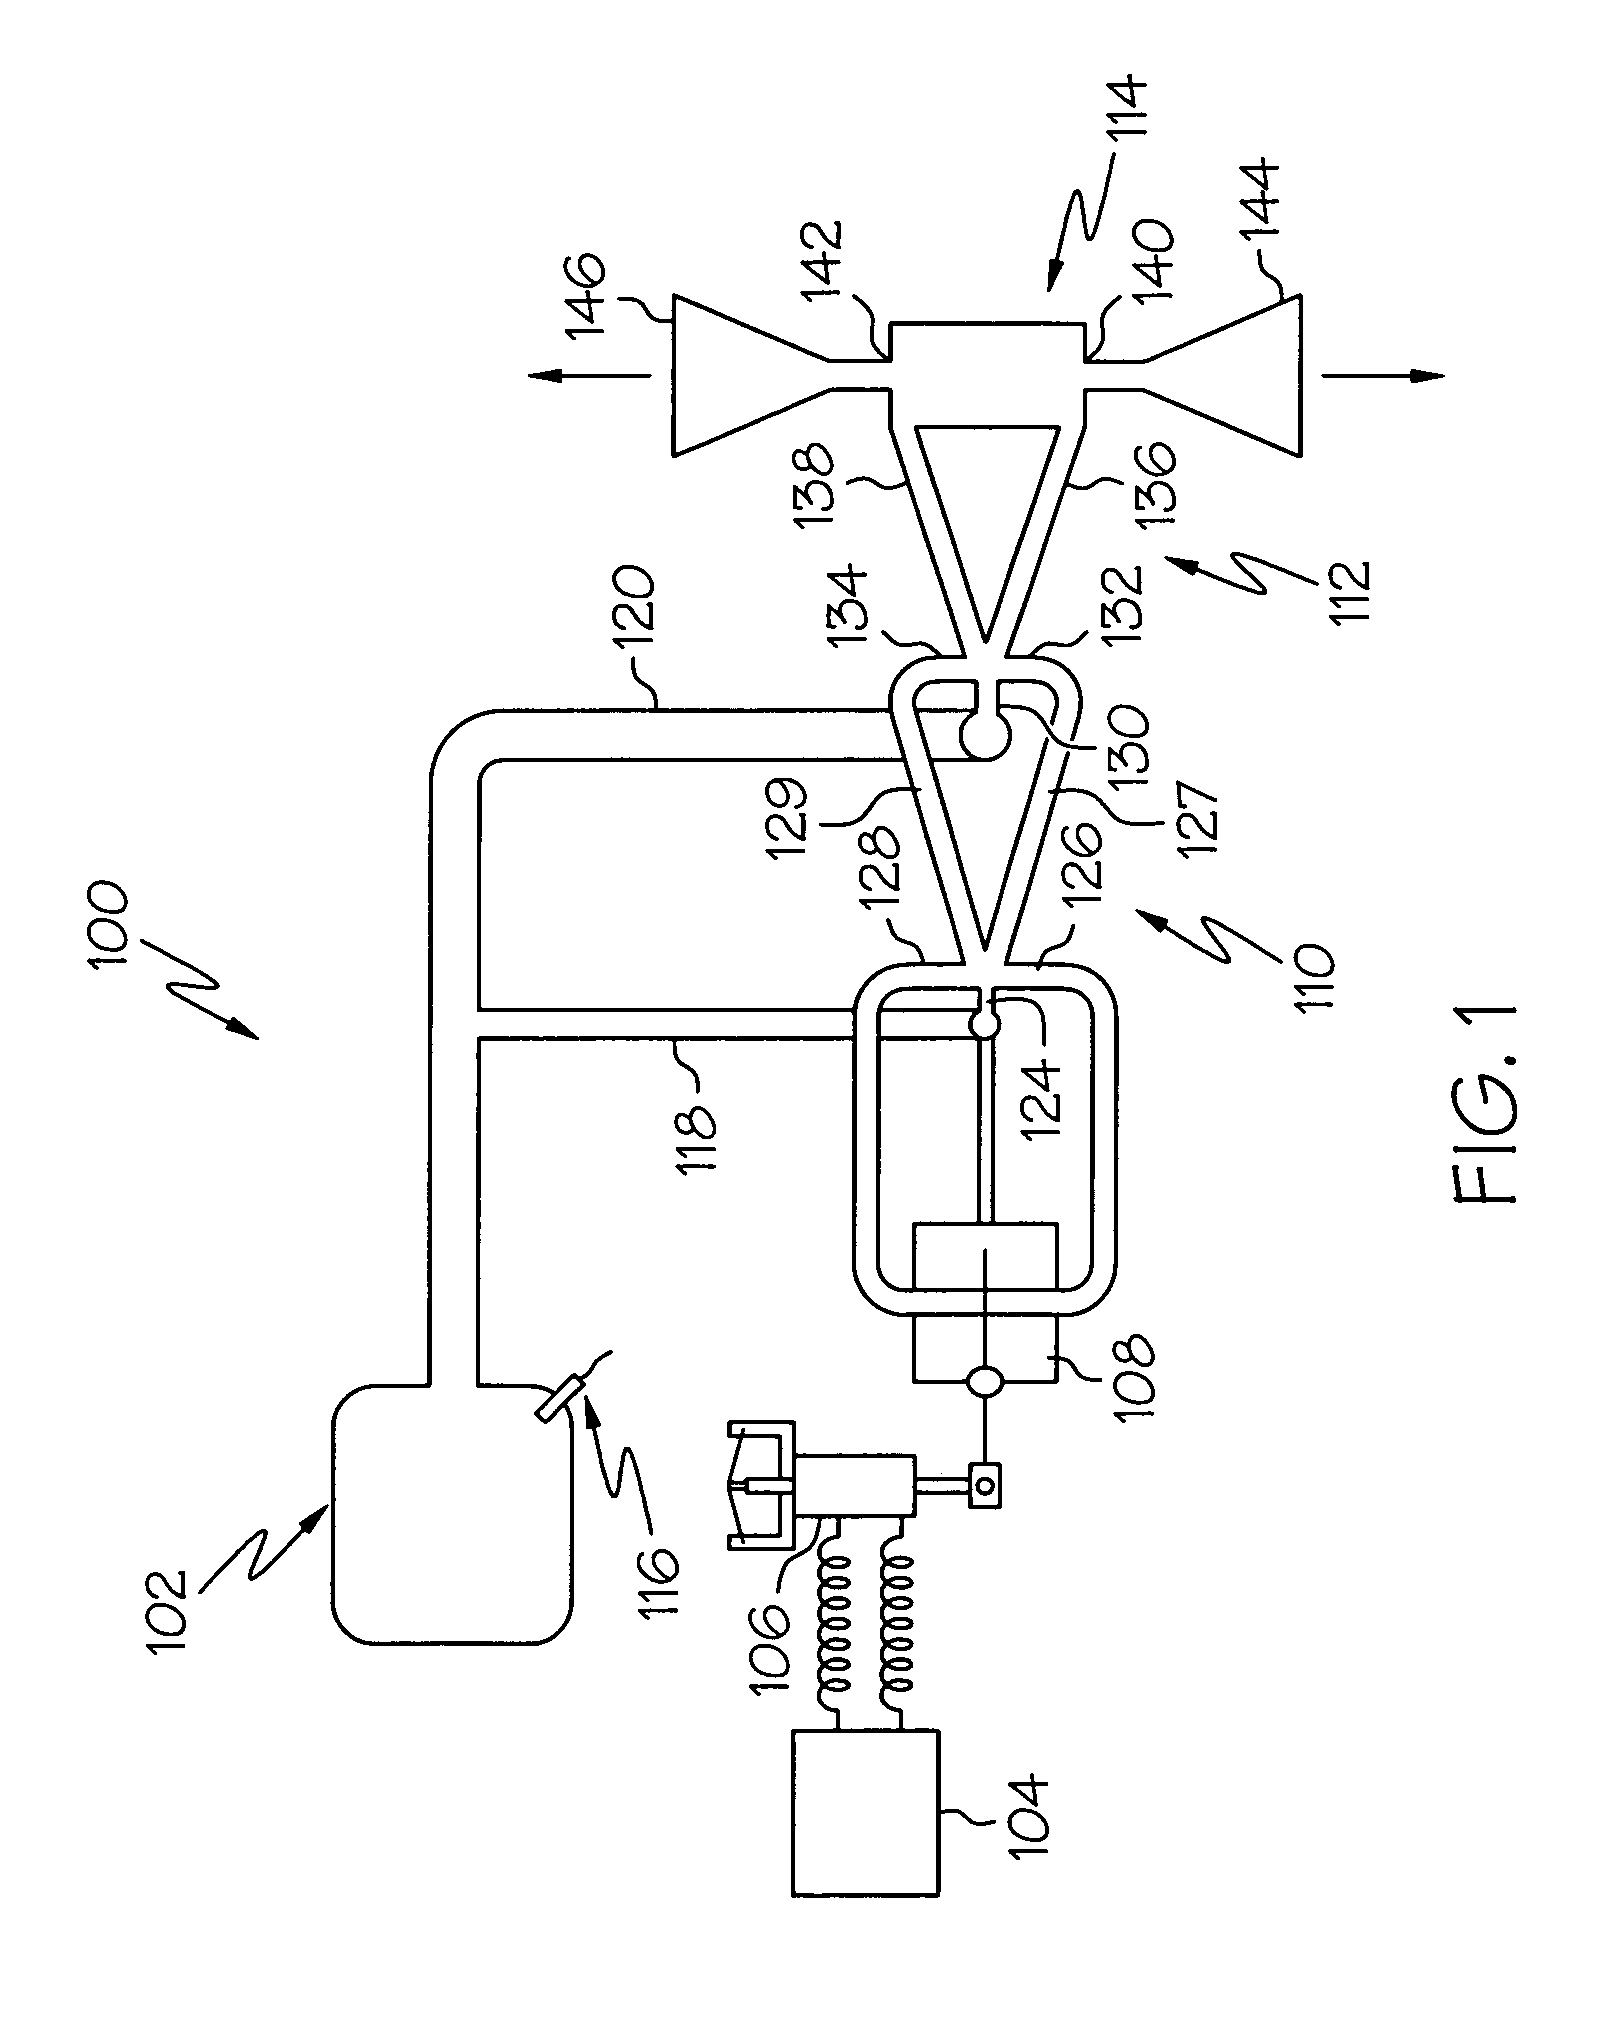 Diverter valve with multiple valve seat rings